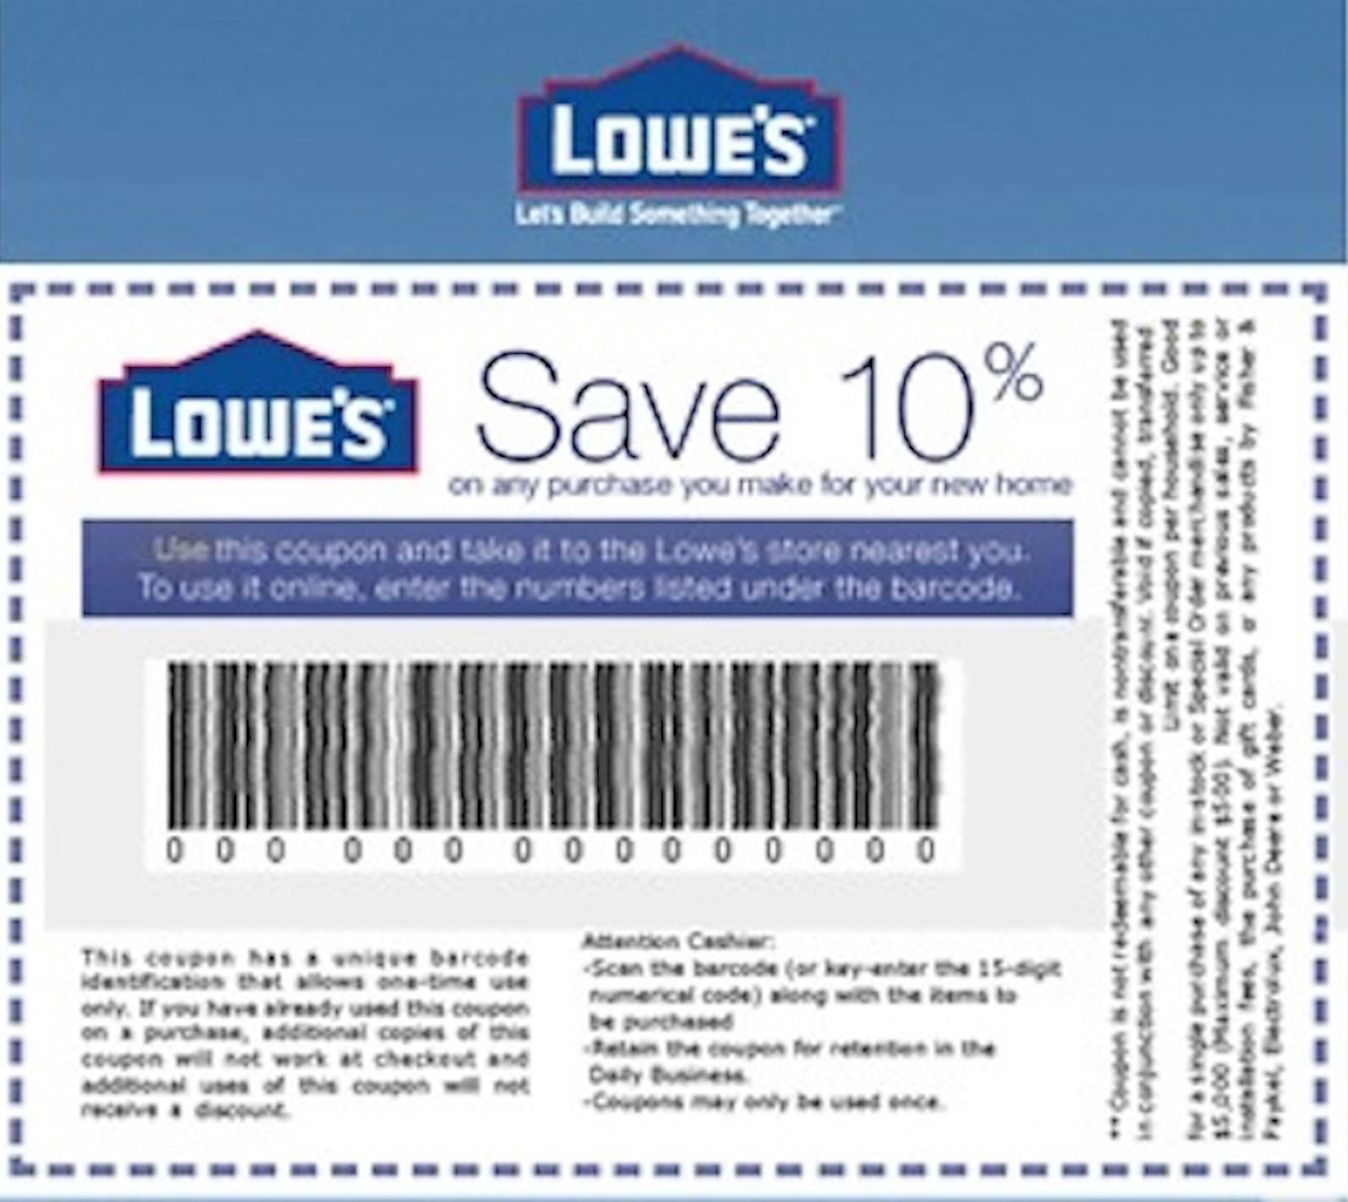 Coupons: Five (5X) Lowes 10% Off Printable-Coupons - Exp 5/31/17 - Lowes Coupon Printable Free